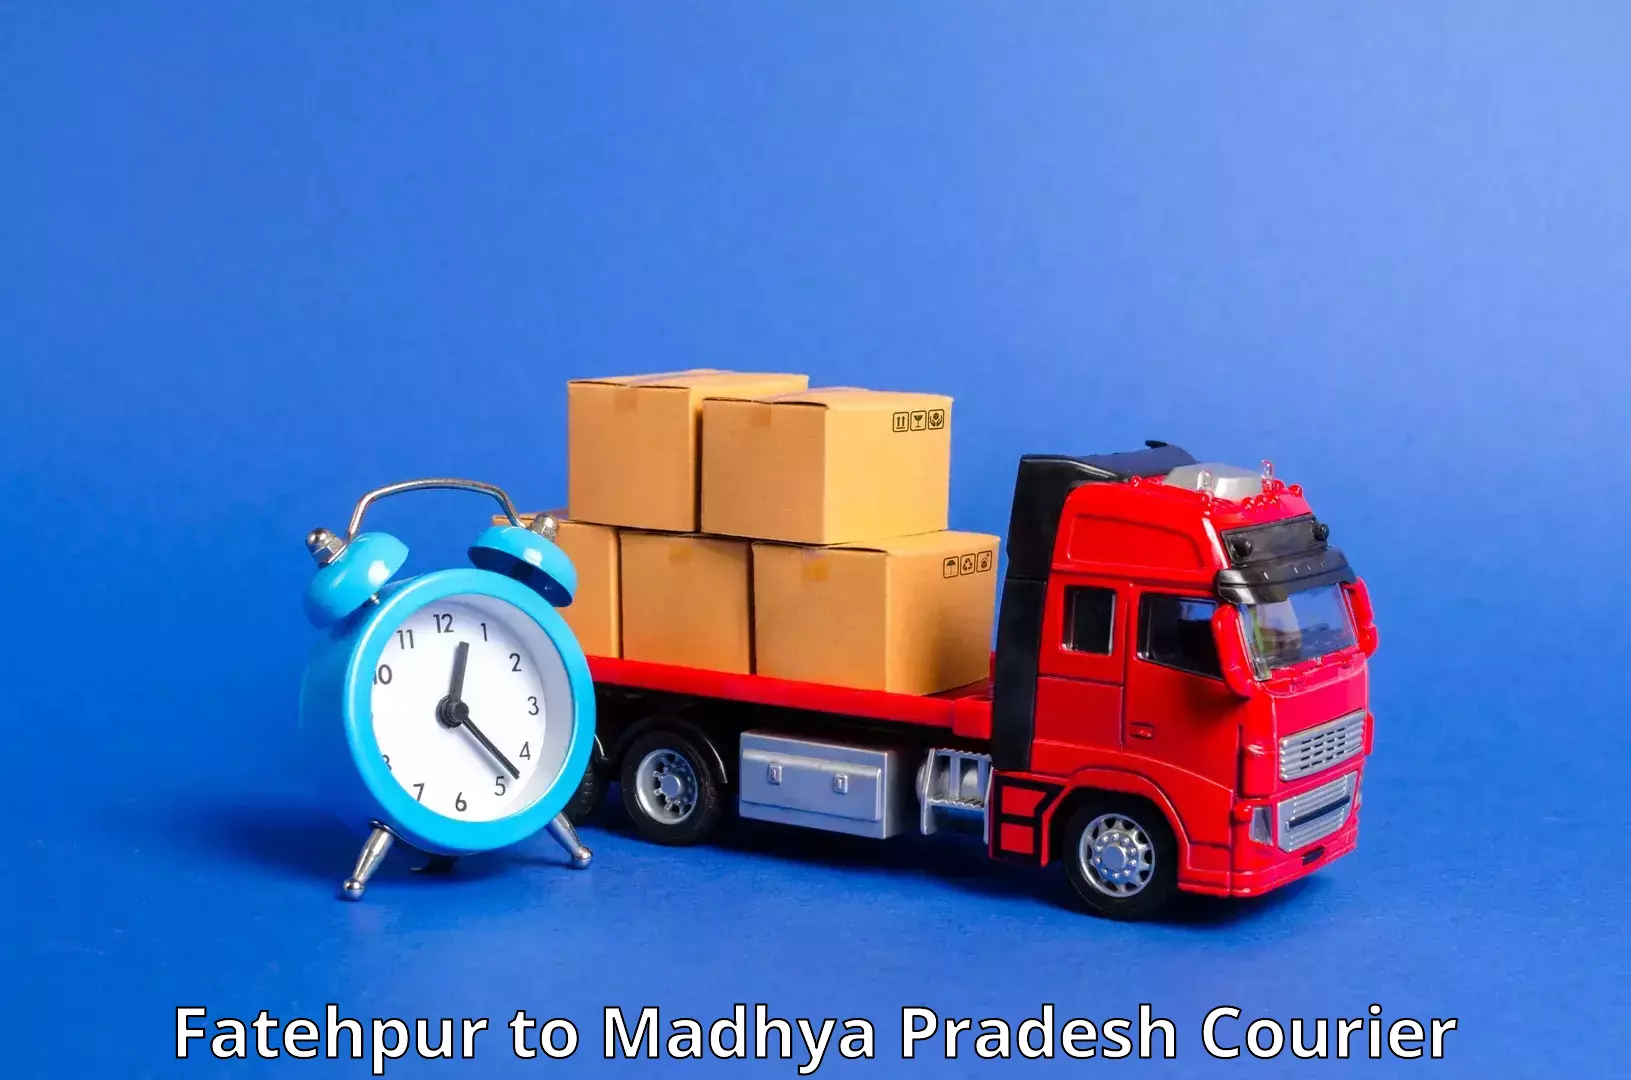 Holiday shipping services Fatehpur to BHEL Bhopal